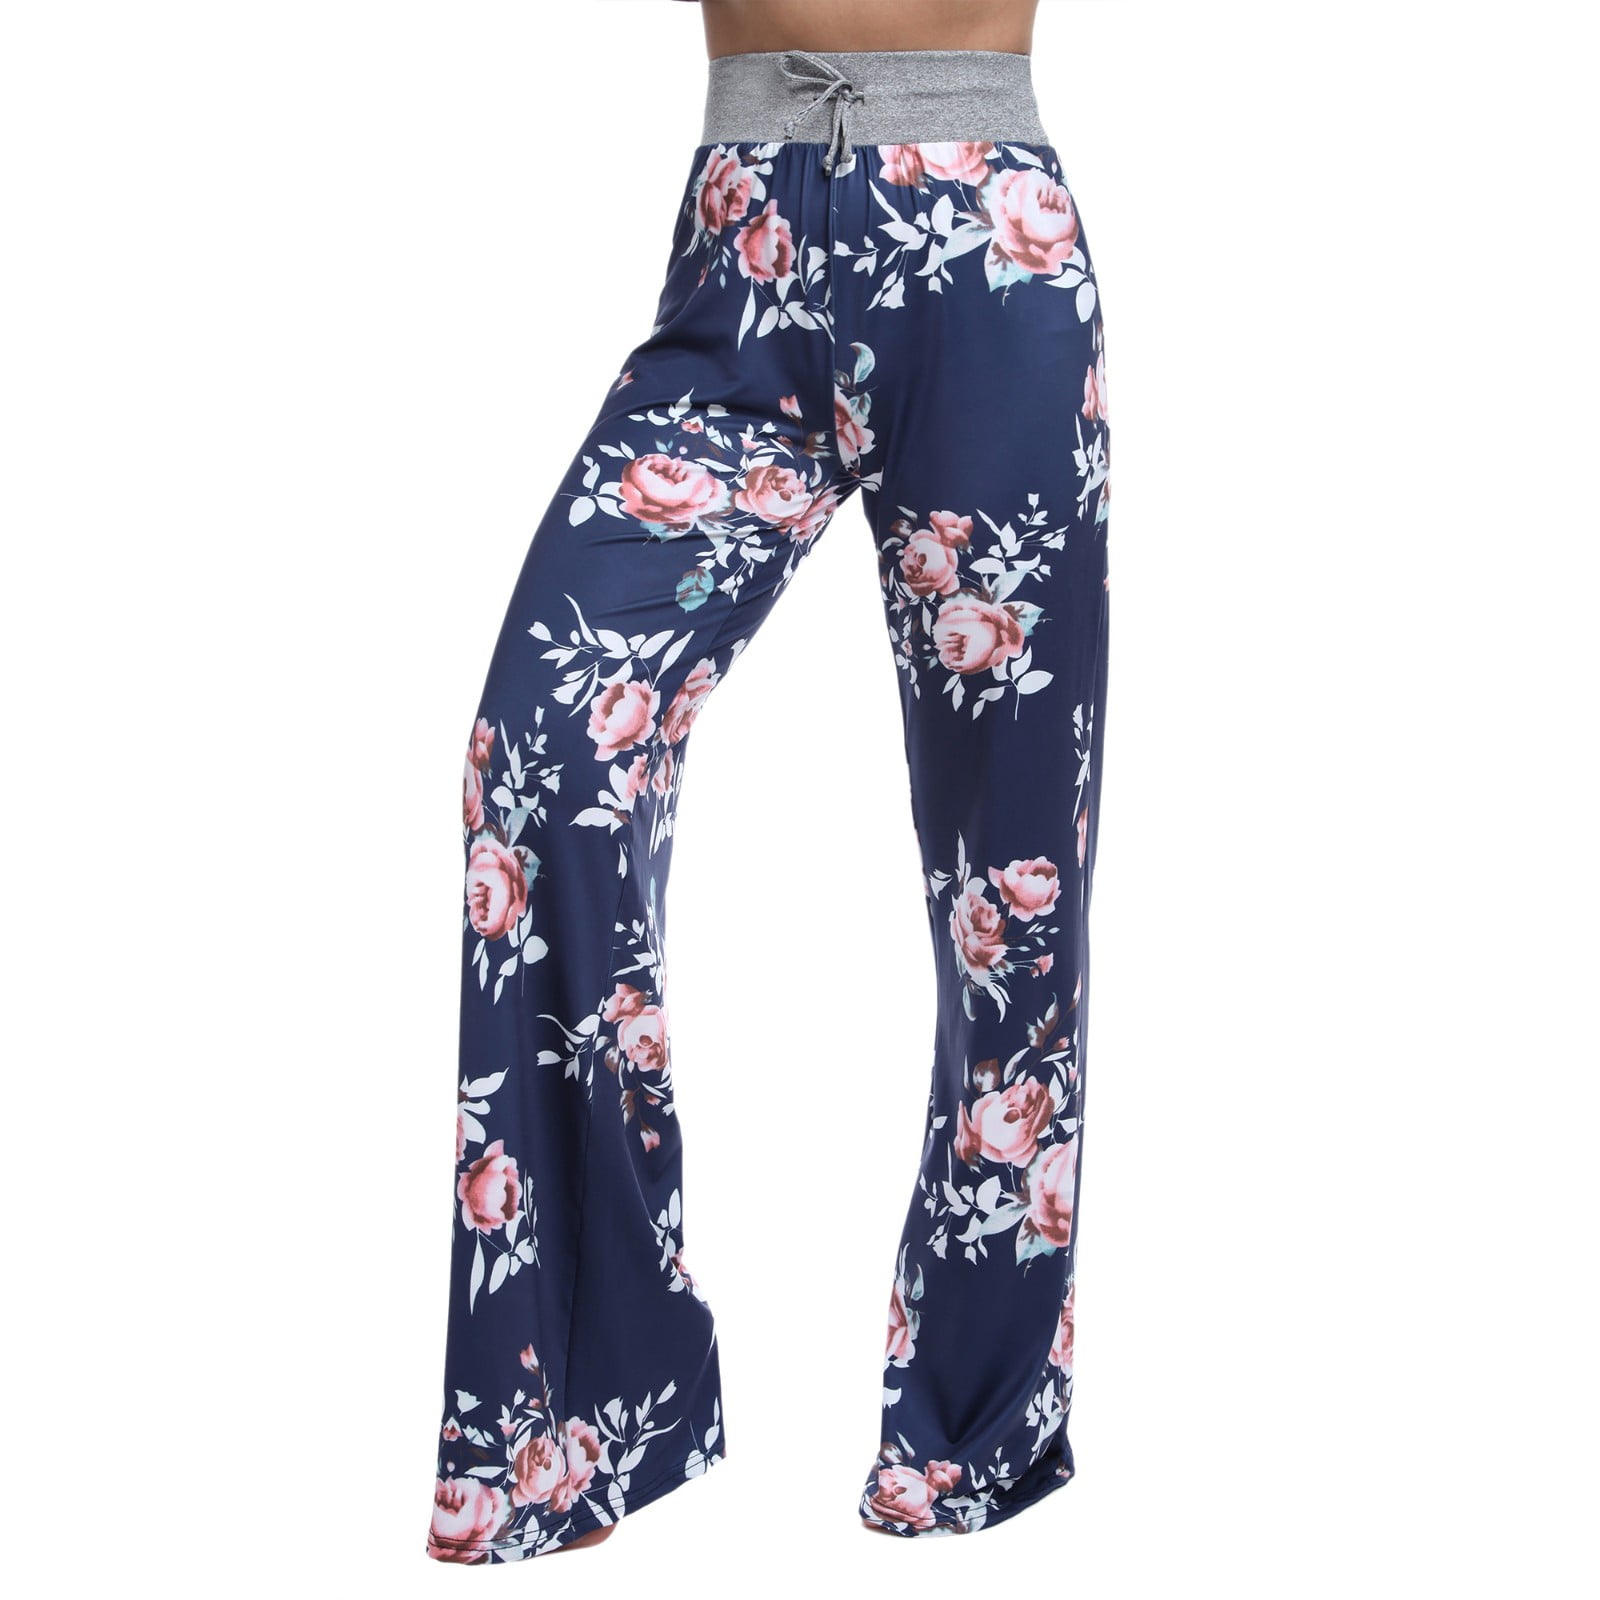 Fittoo - FITTOO Women Casual Loose Boho Pants Yoga Pants Floral Print ...